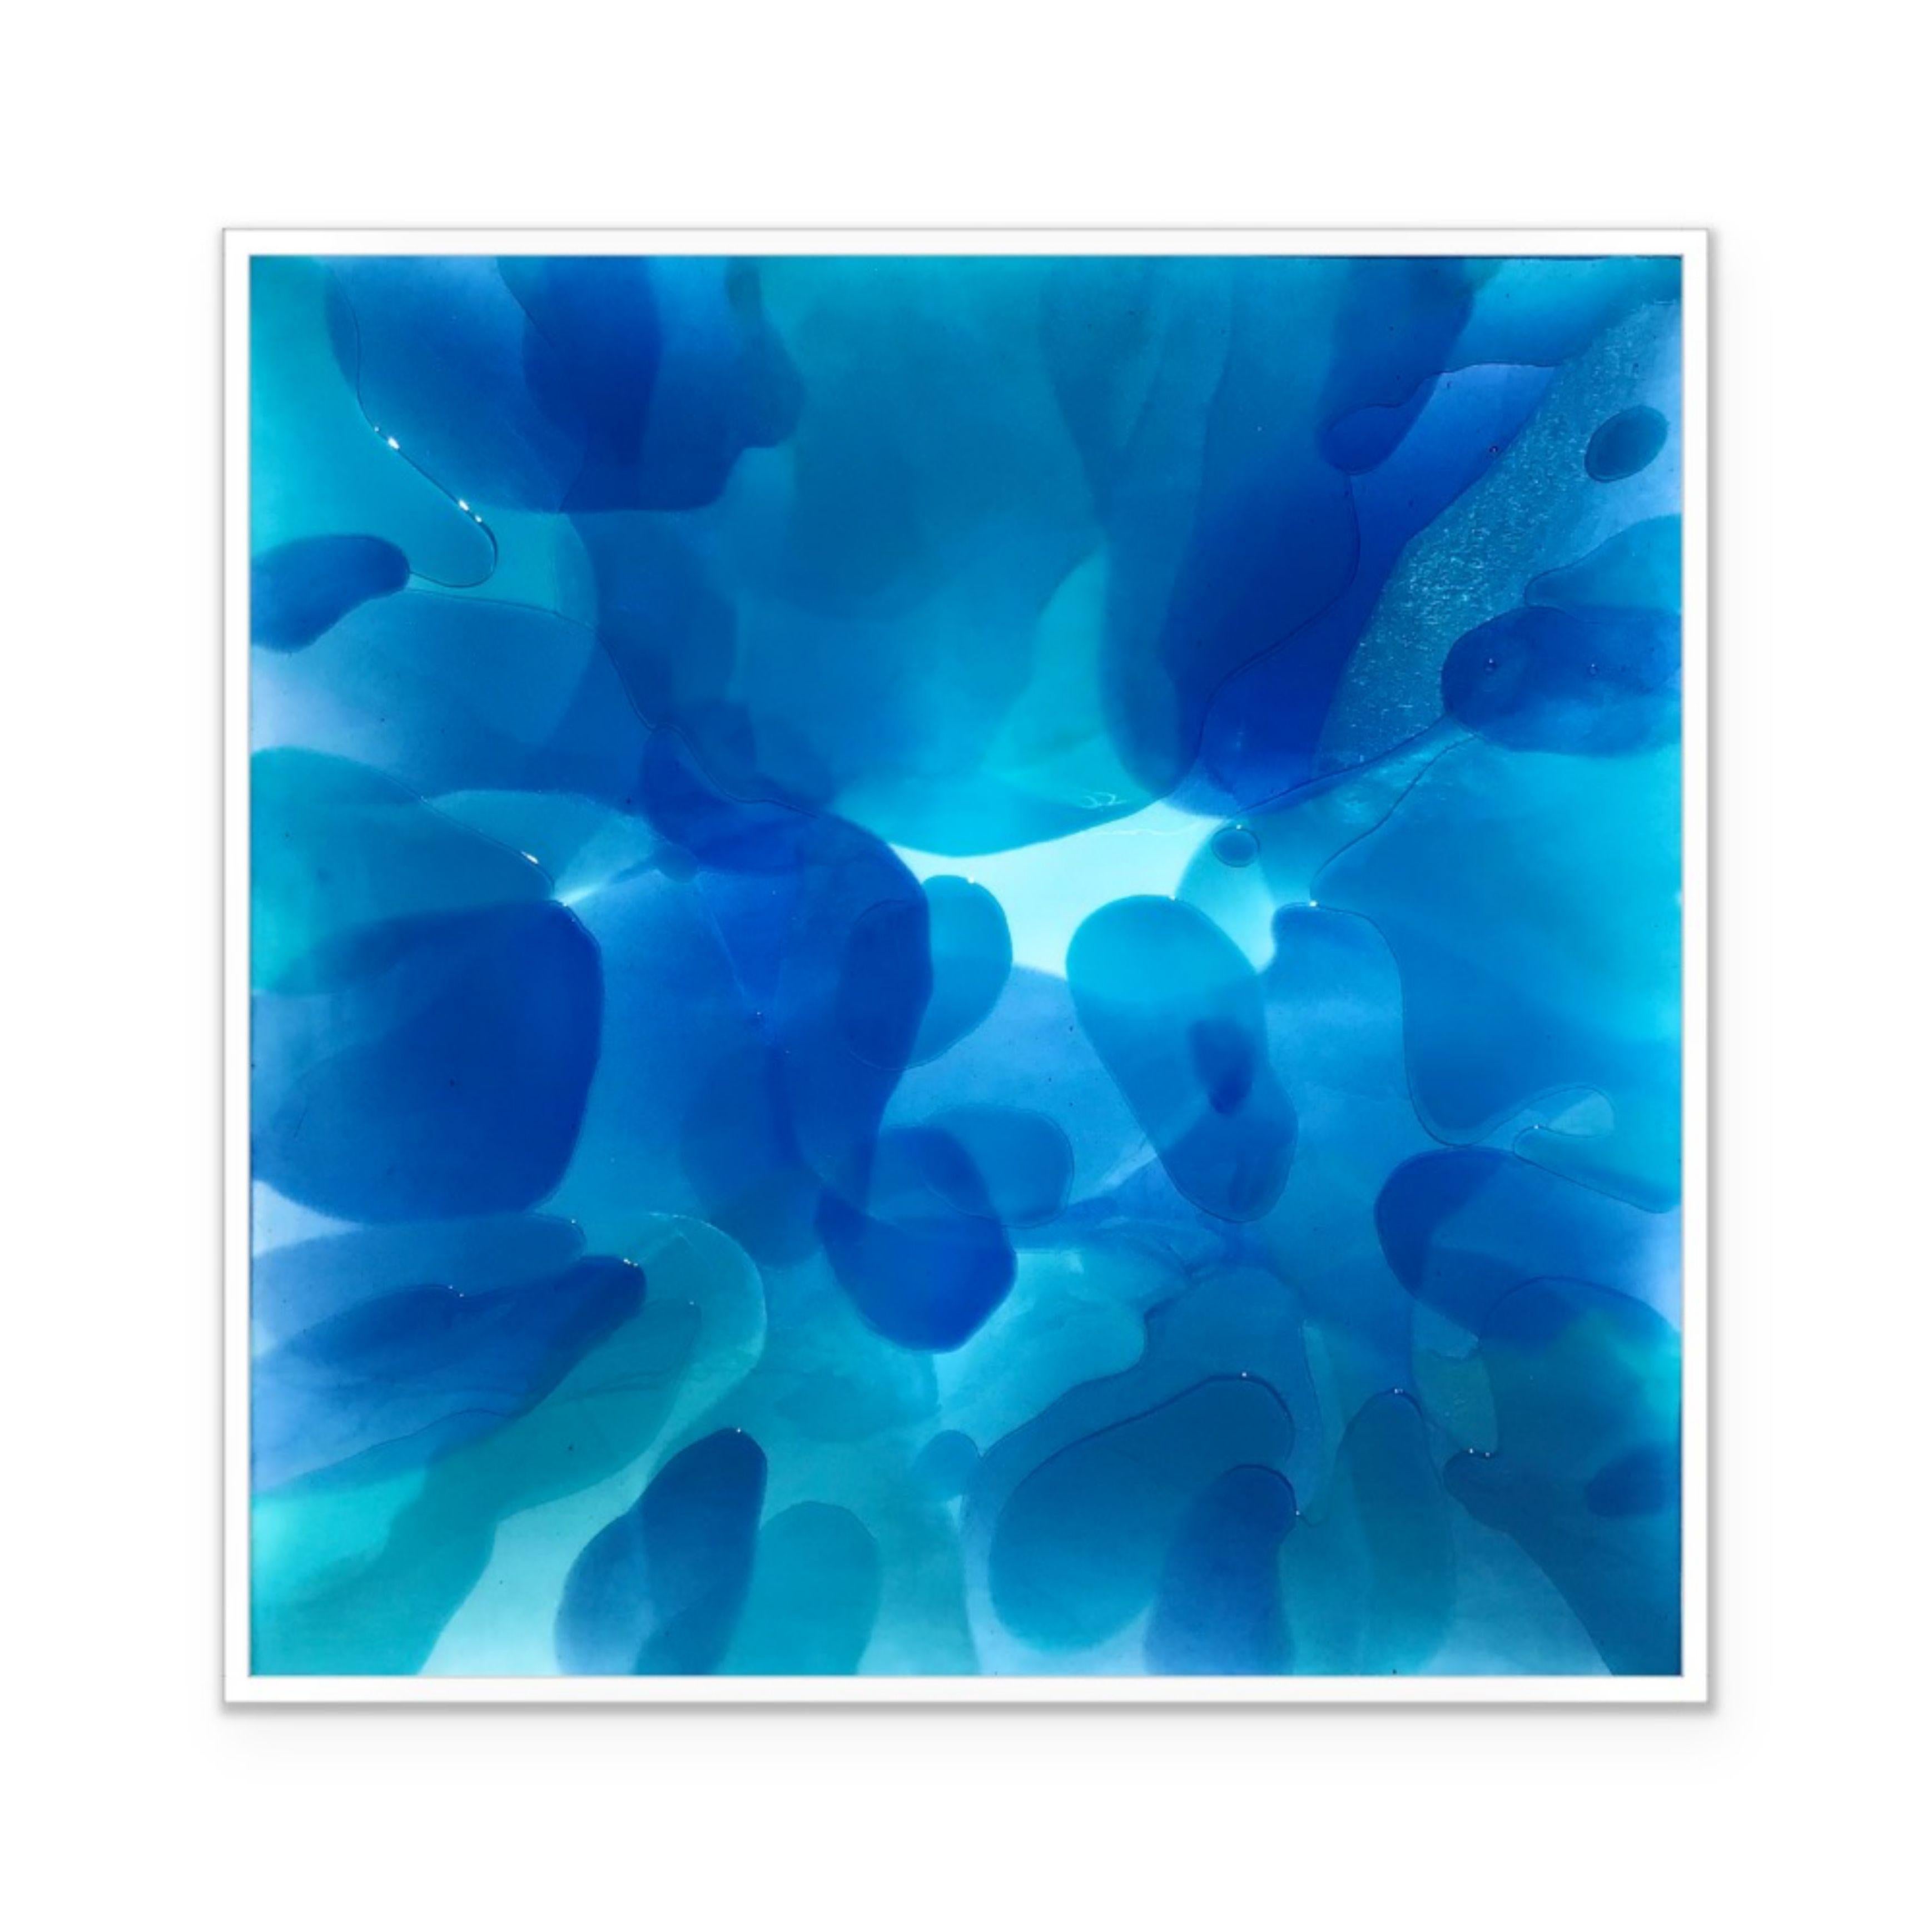 TITLE: Moments of Transparency    DESCRIPTION: Moments of Transparency is about inner peace and awareness, that is created by moments of connection with nature.    MATERIALS: It is painted with resin, combined with high quality acrylics,